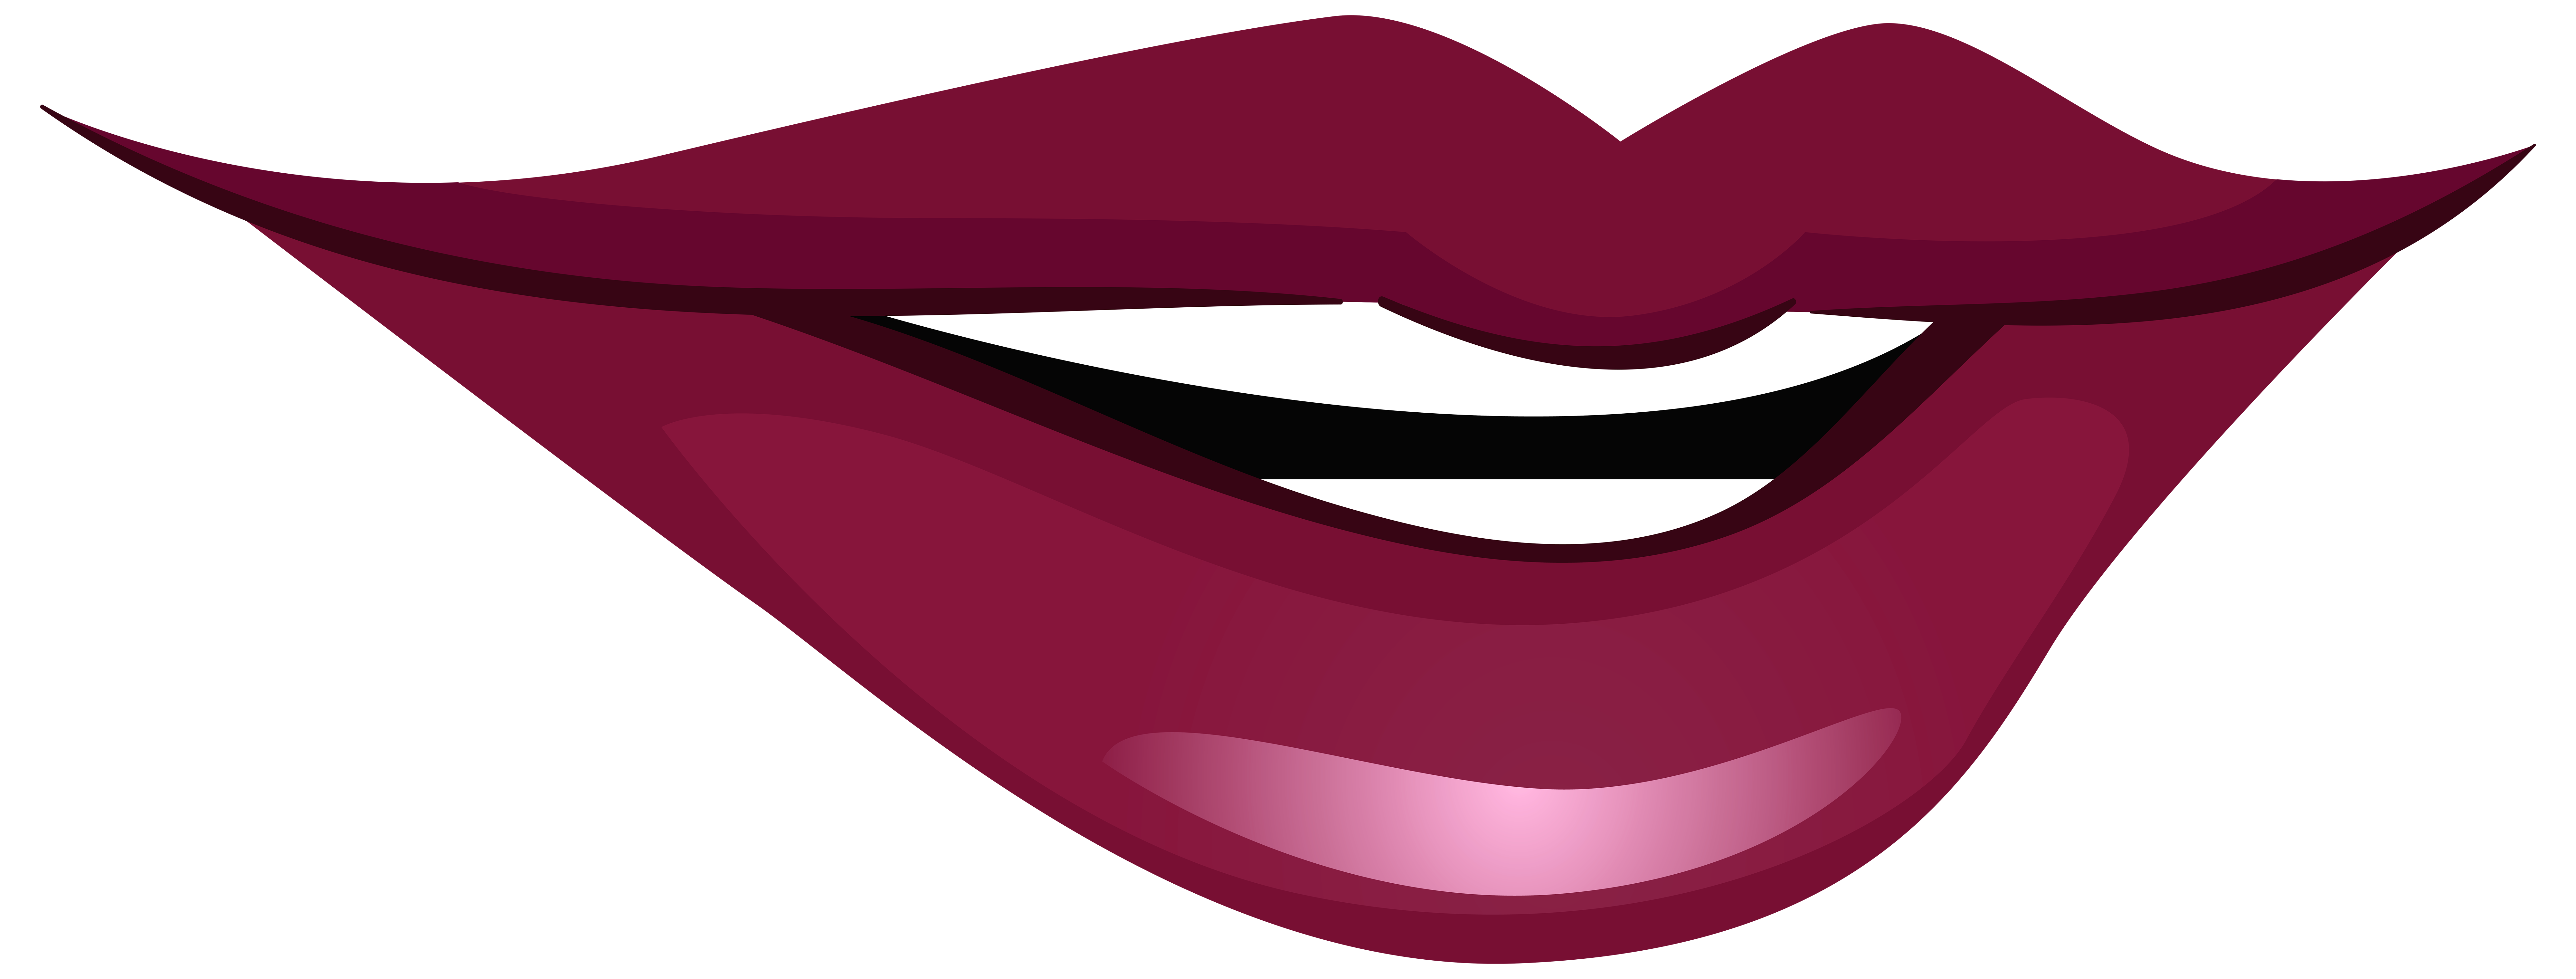 free clipart smiling lips - photo #50